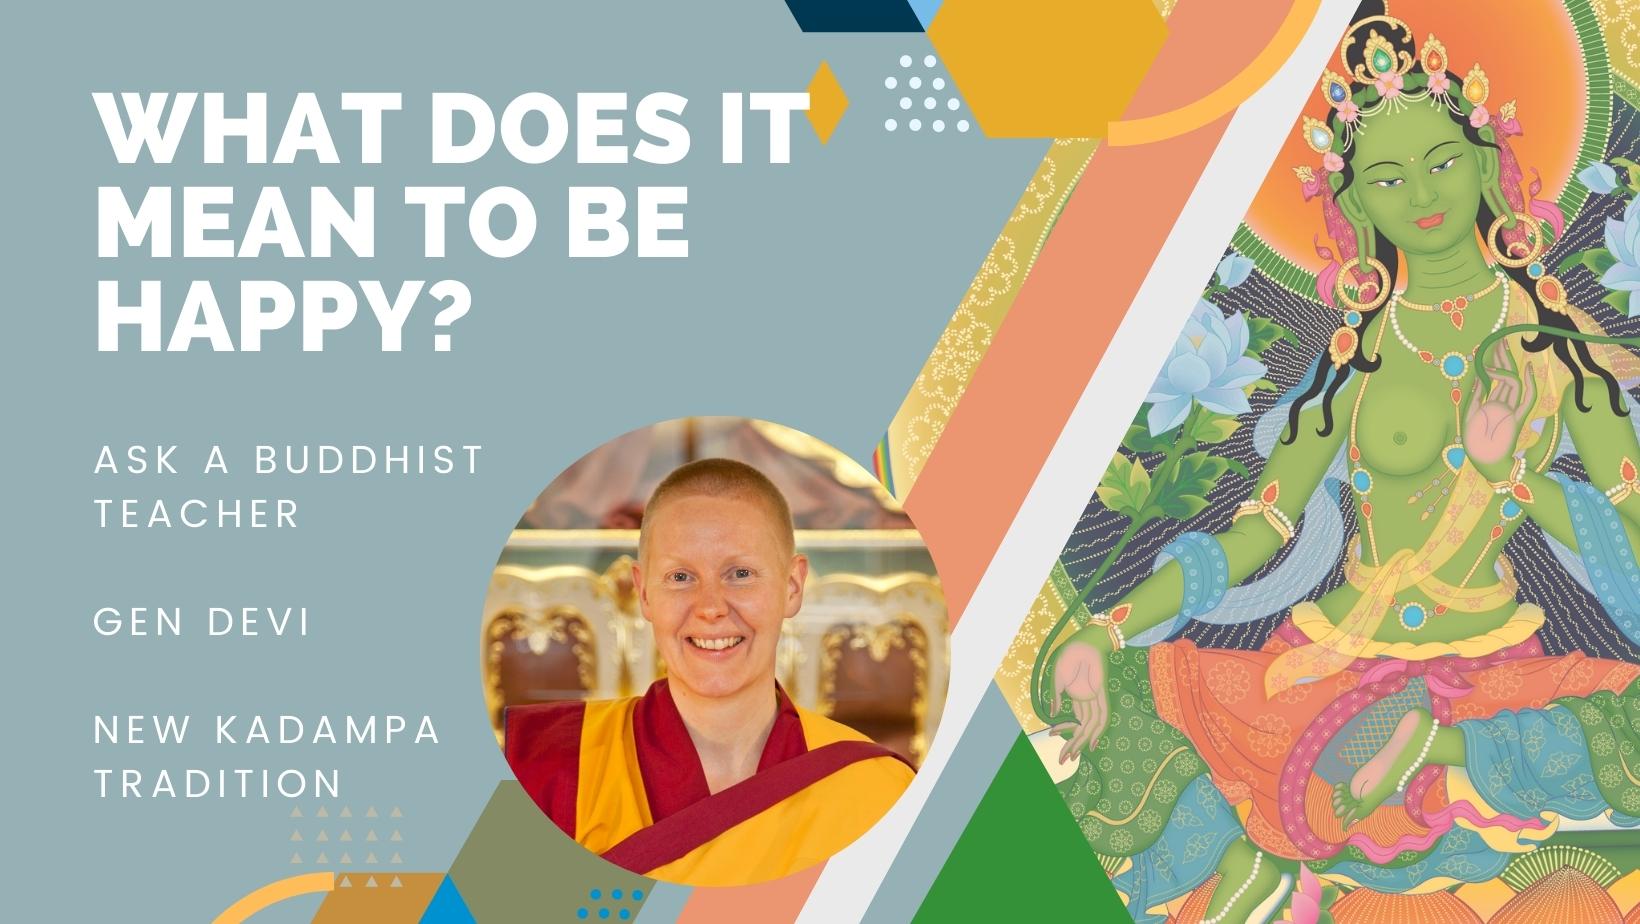 Ask a Buddhist Teacher: What does it mean to be happy?